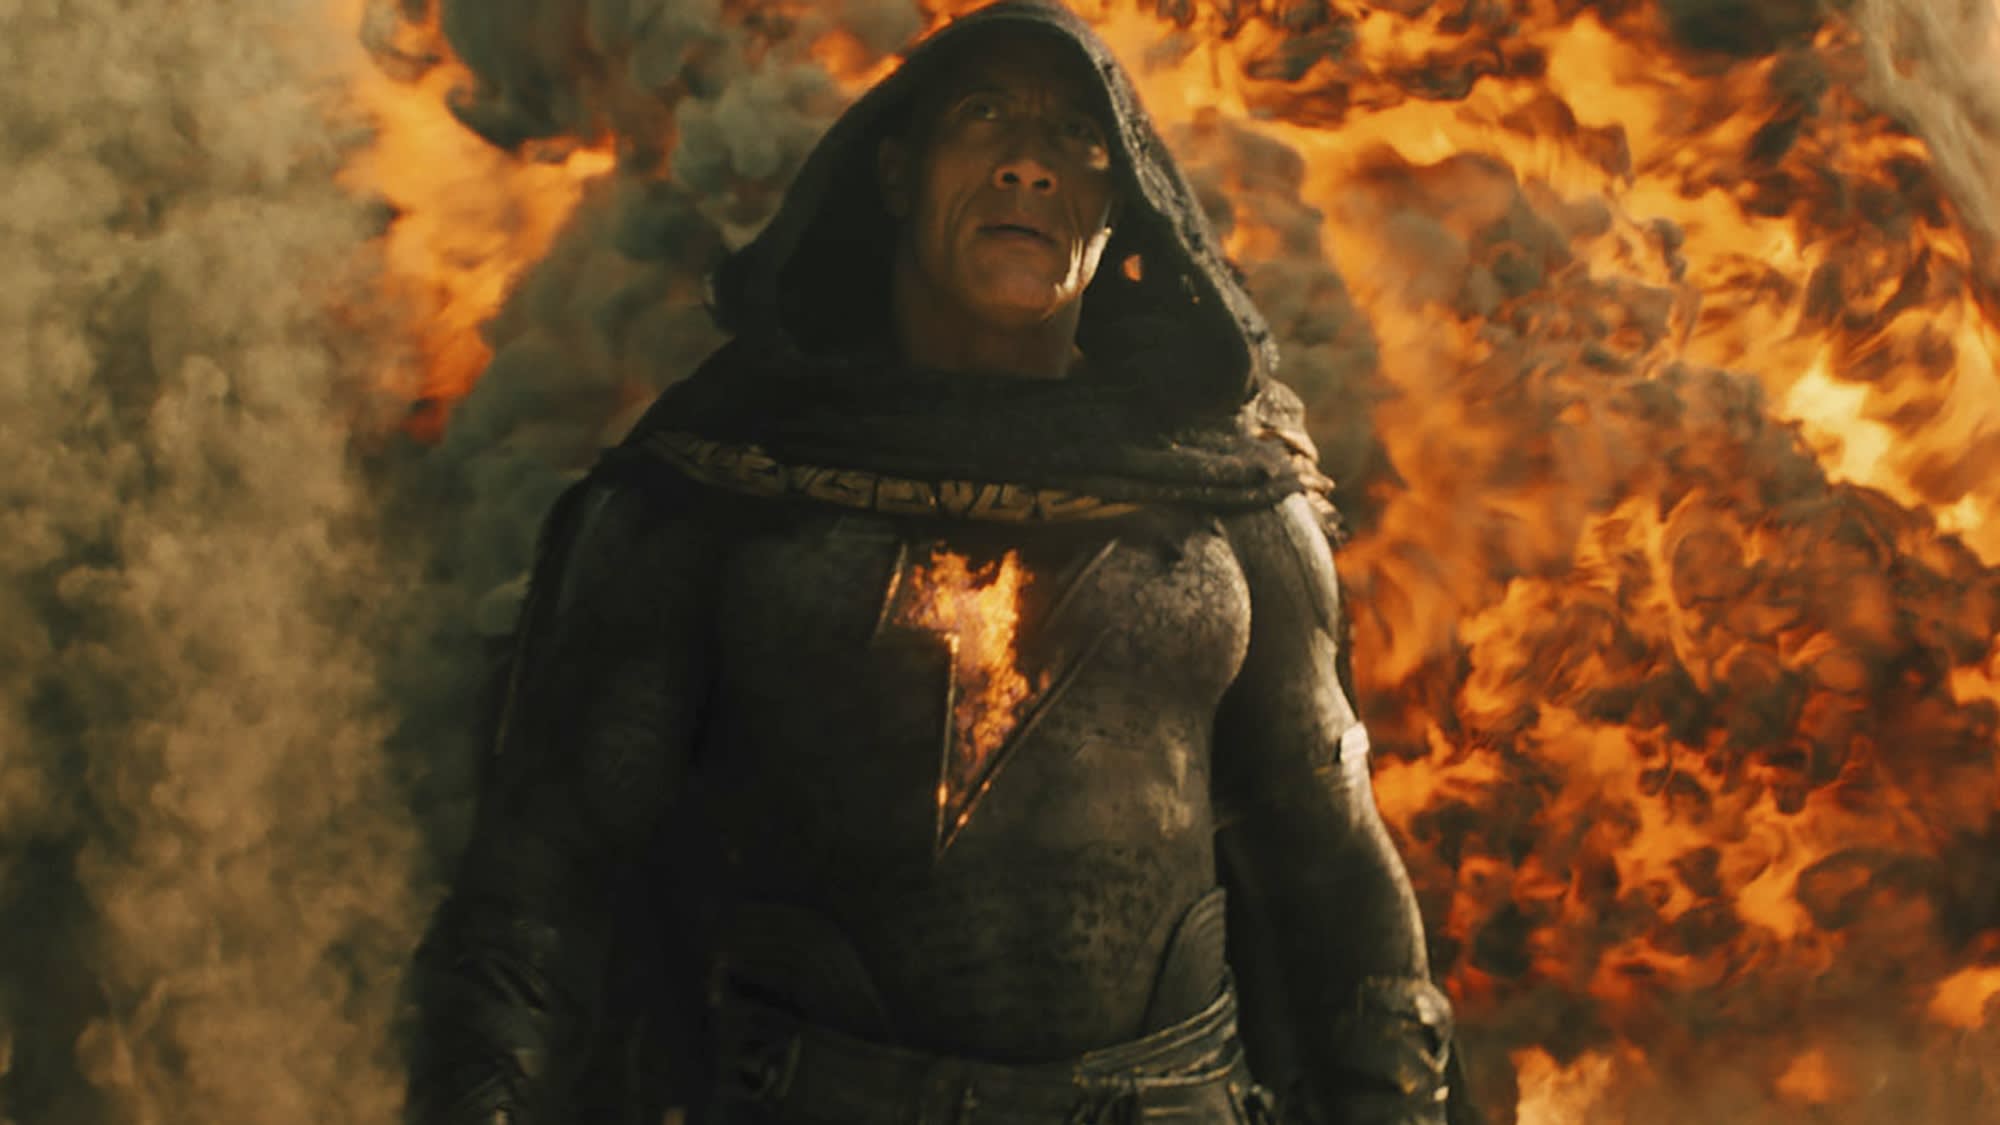 Box Office Bust: 'Black Adam' Faces Theatrical Losses